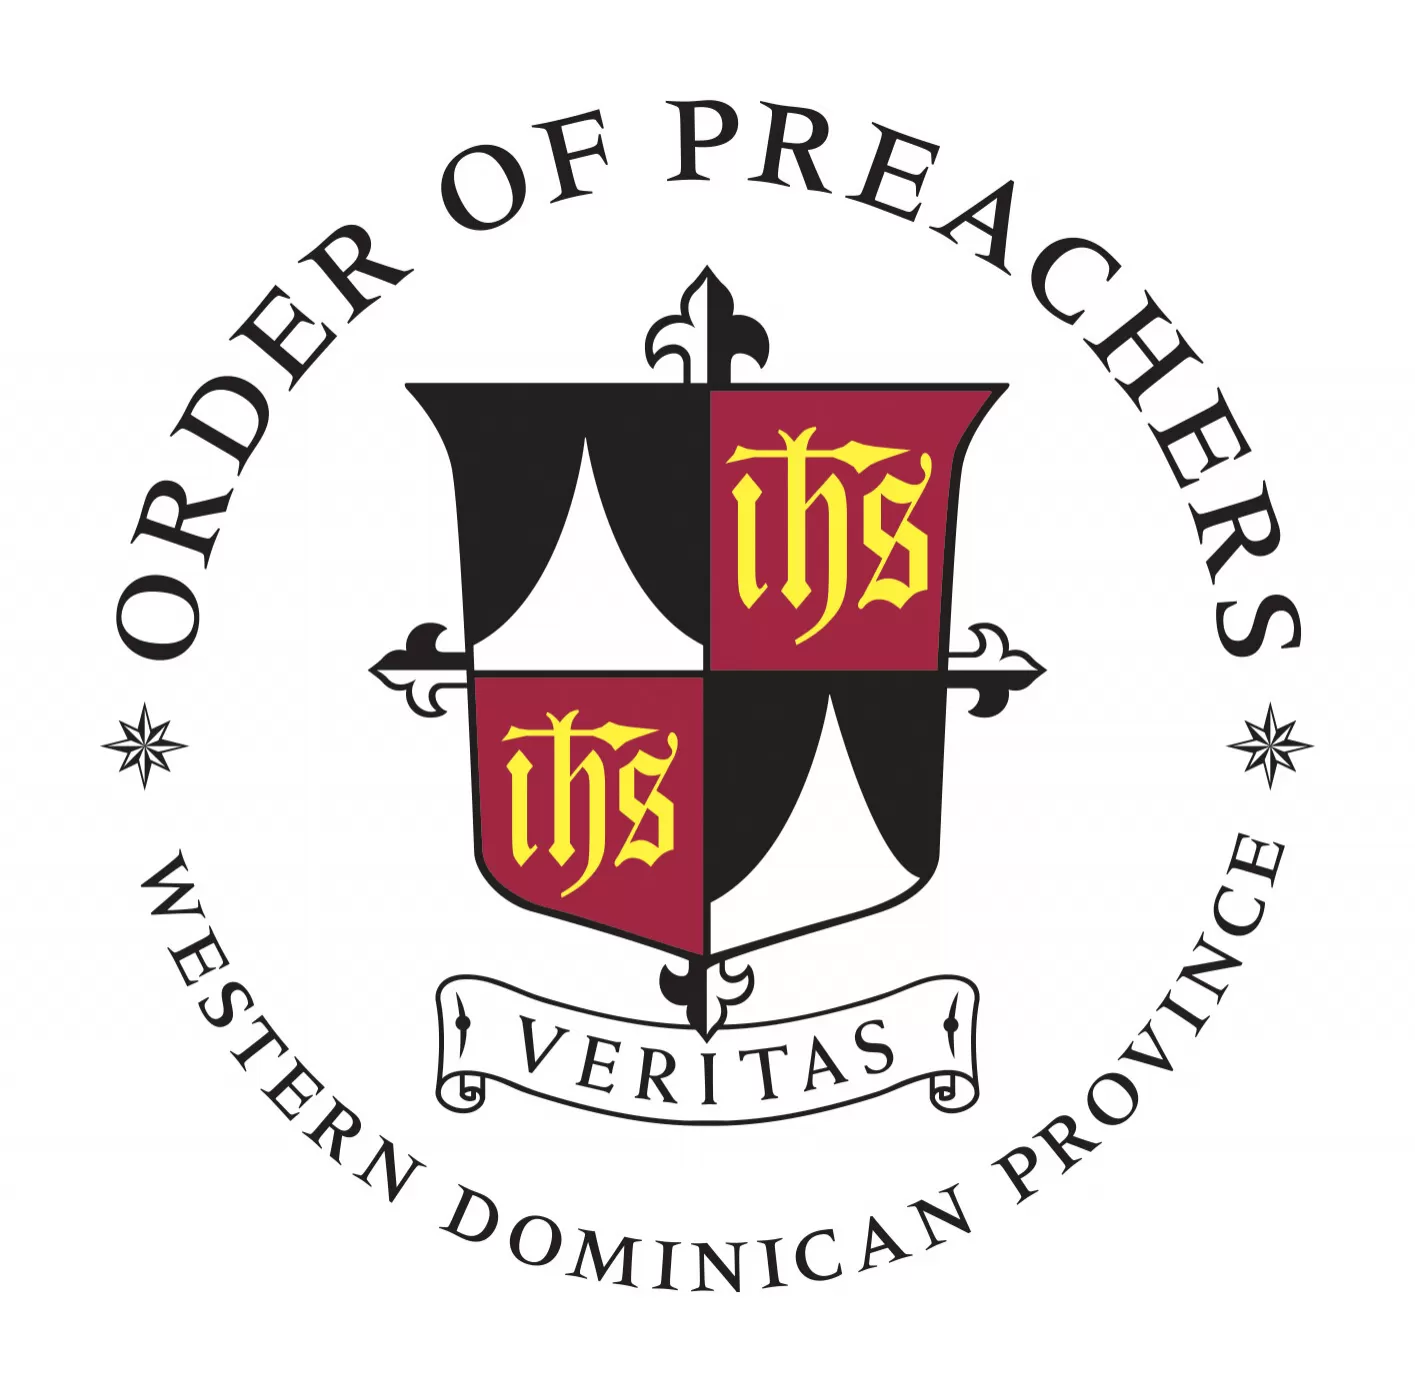 Statement on the Election of Fr. Allen Moran, O.P., as Prior Provincial of the Eastern Dominican Province